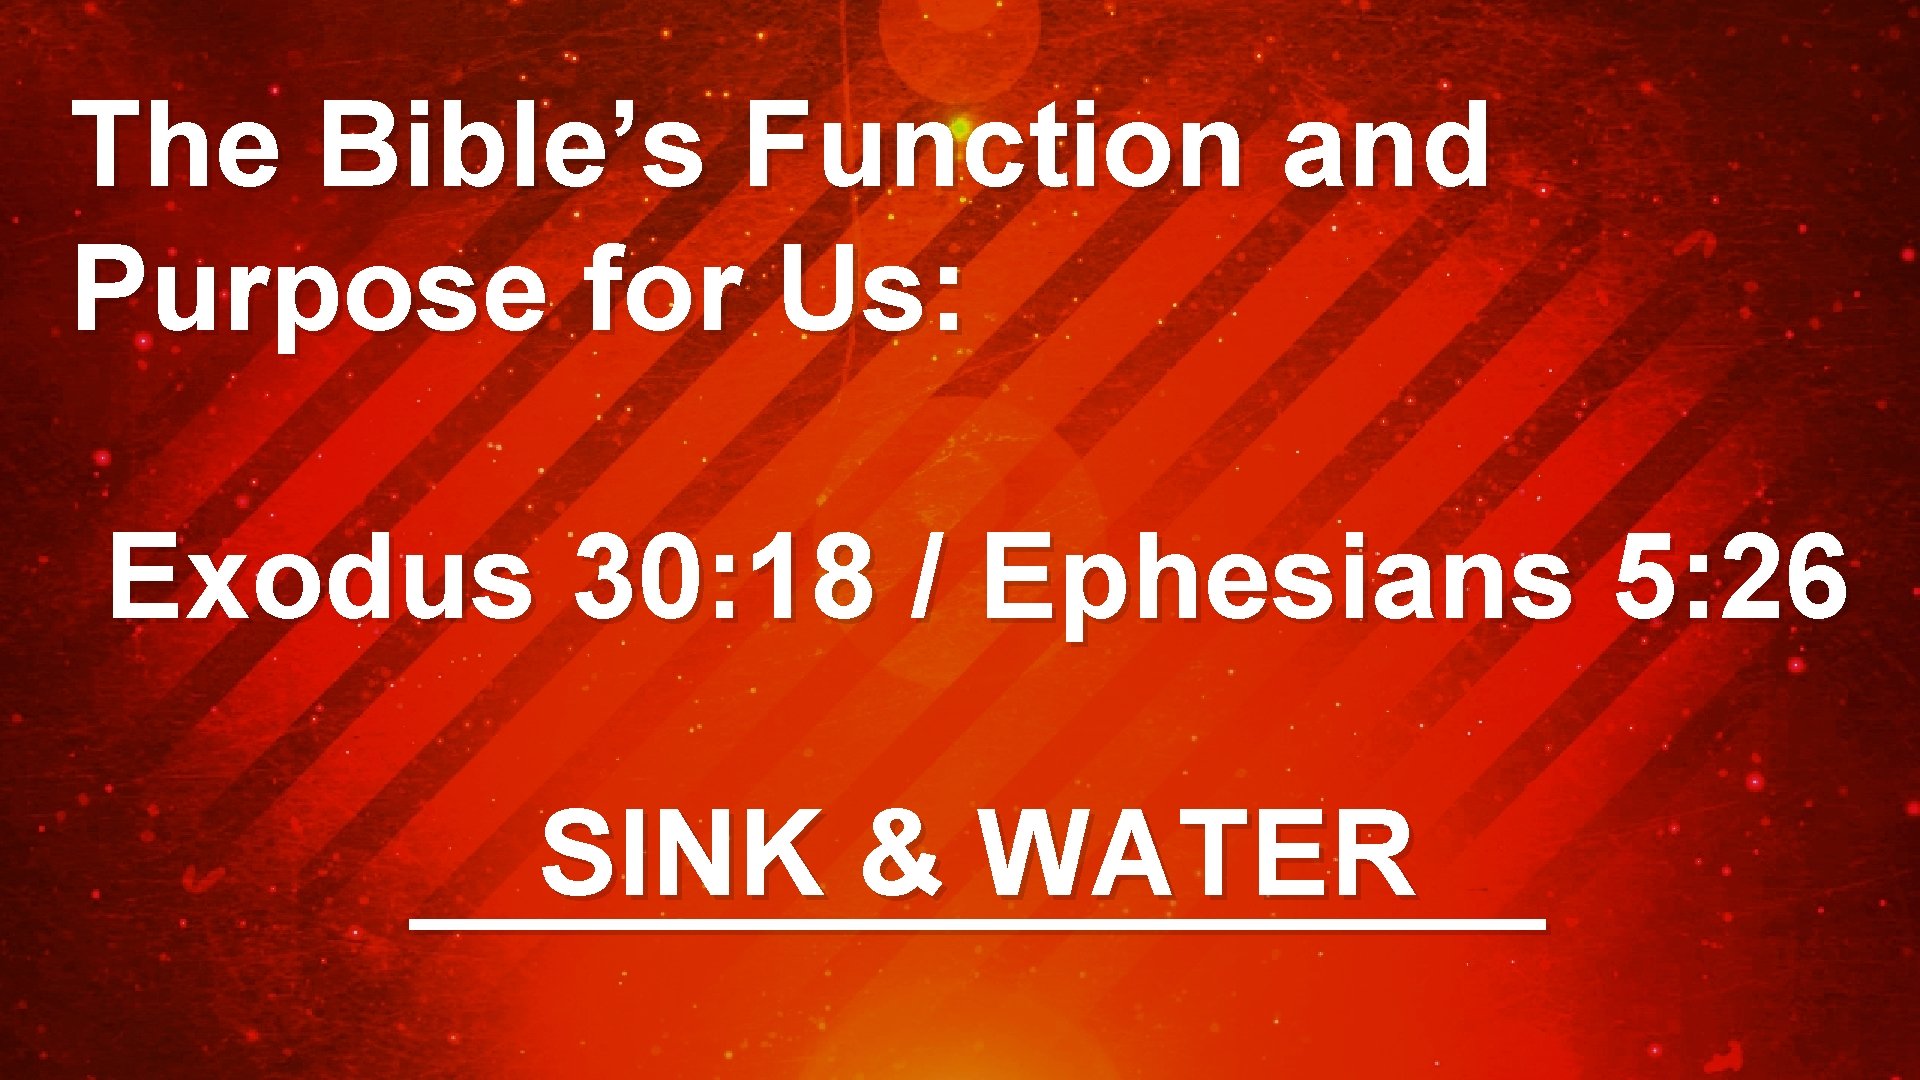 The Bible’s Function and Purpose for Us: Exodus 30: 18 / Ephesians 5: 26